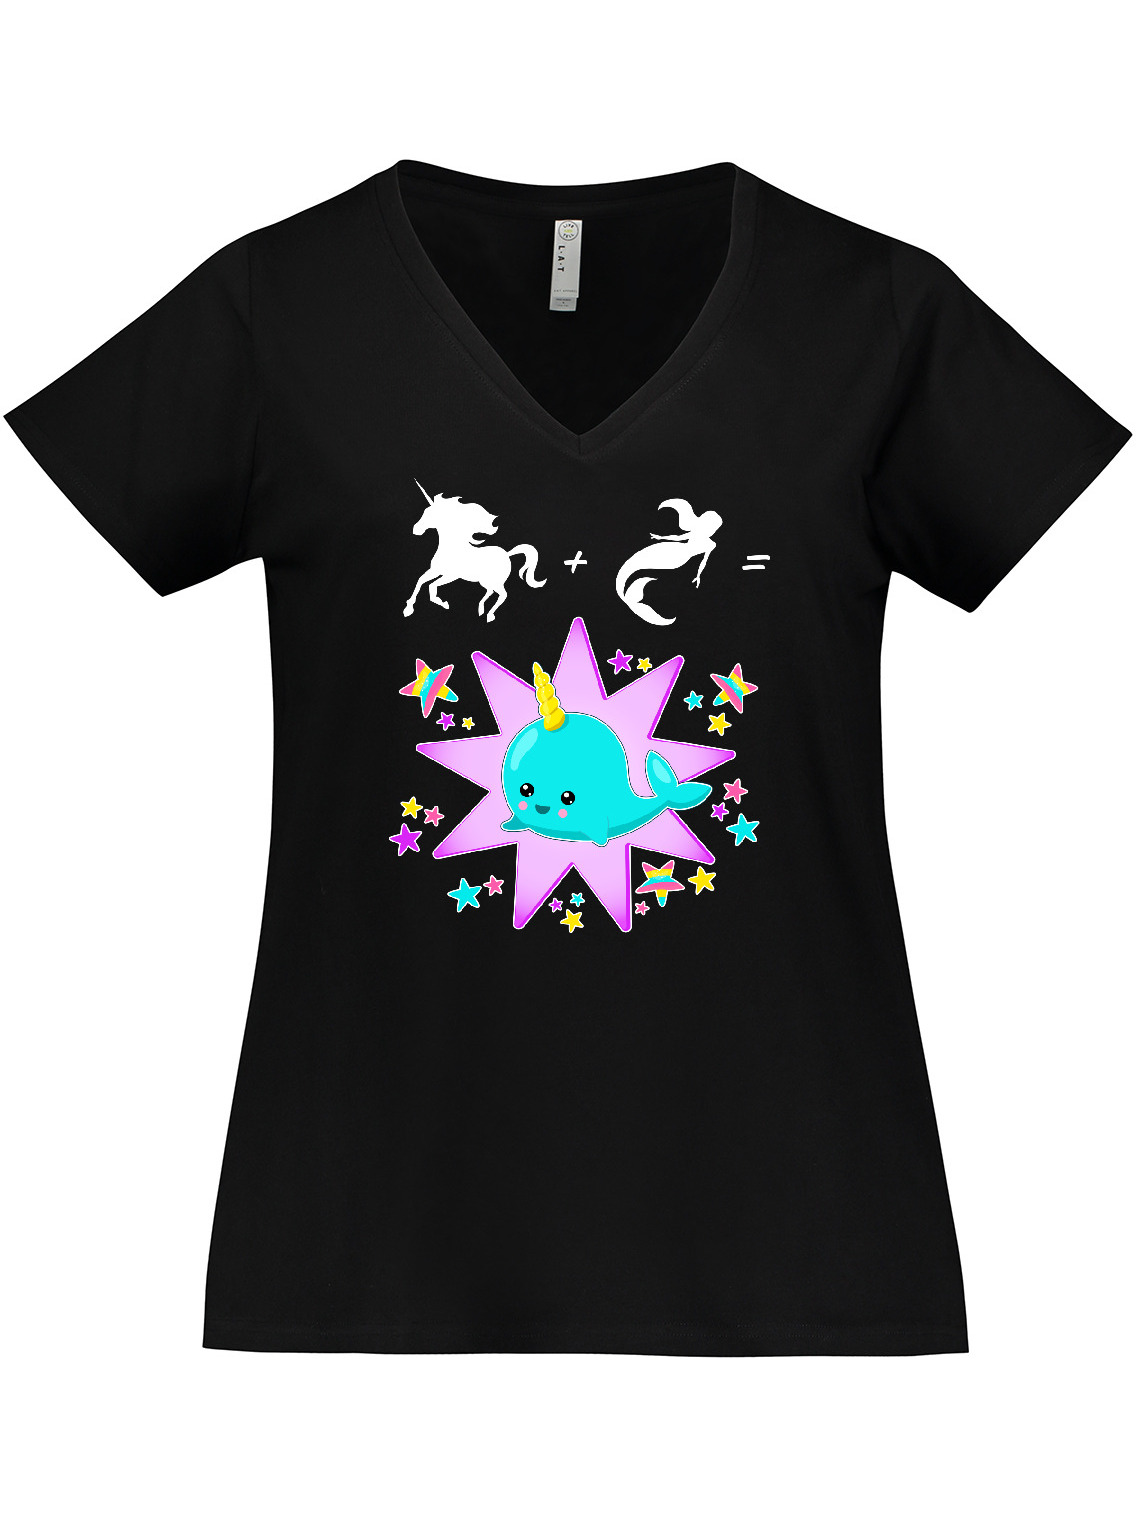 Inktastic Unicorn Plus Mermaid Equals Narwhal- cute Women's Plus Size V-Neck T-Shirt - image 1 of 4